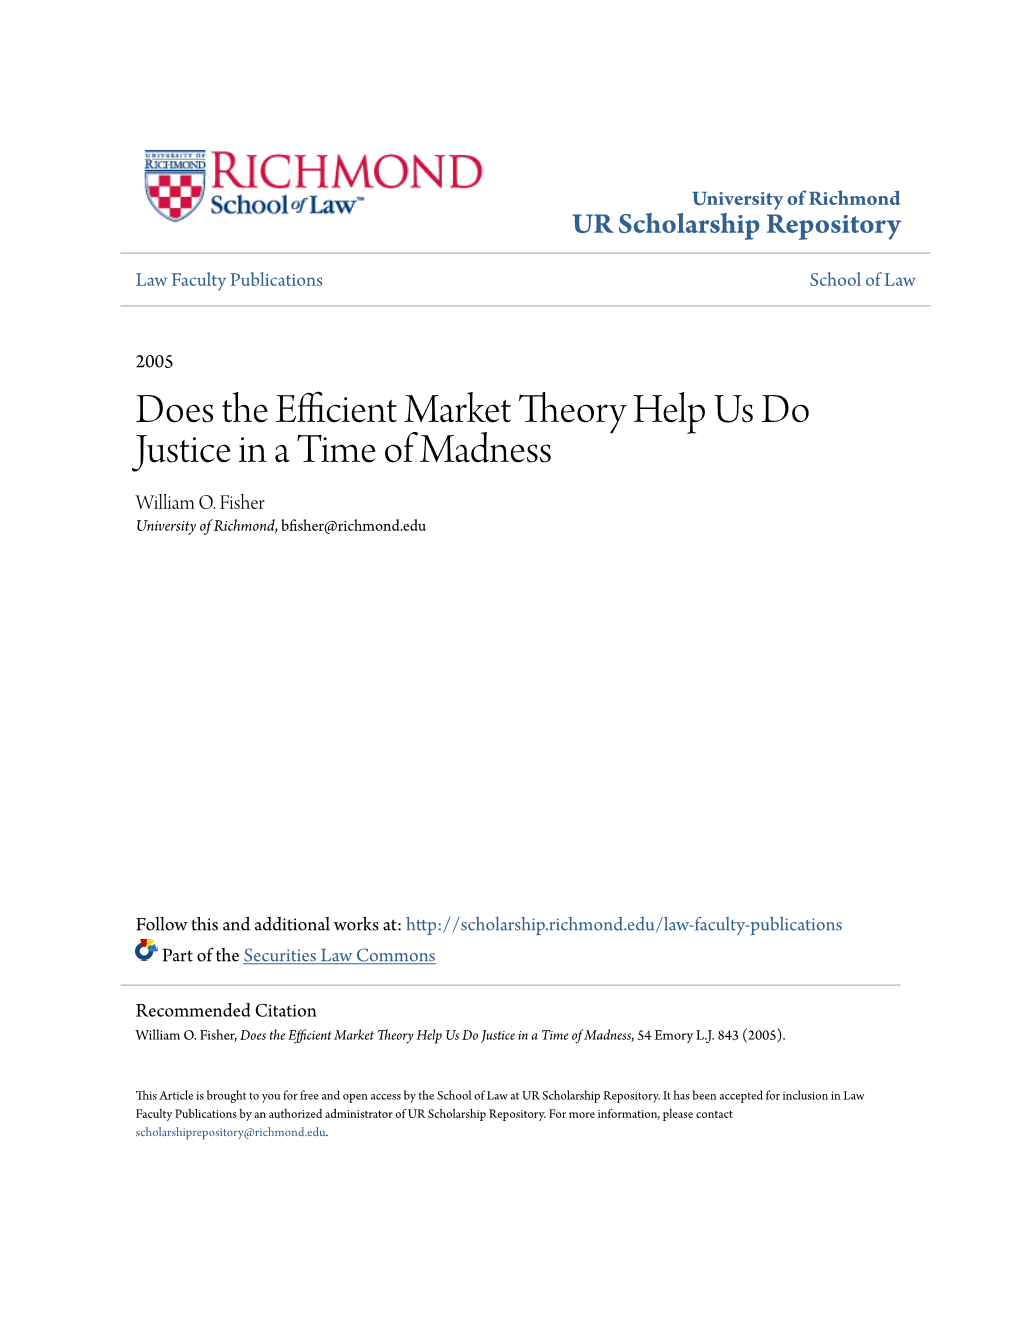 Does the Efficient Market Theory Help Us Do Justice in a Time of Madness William O